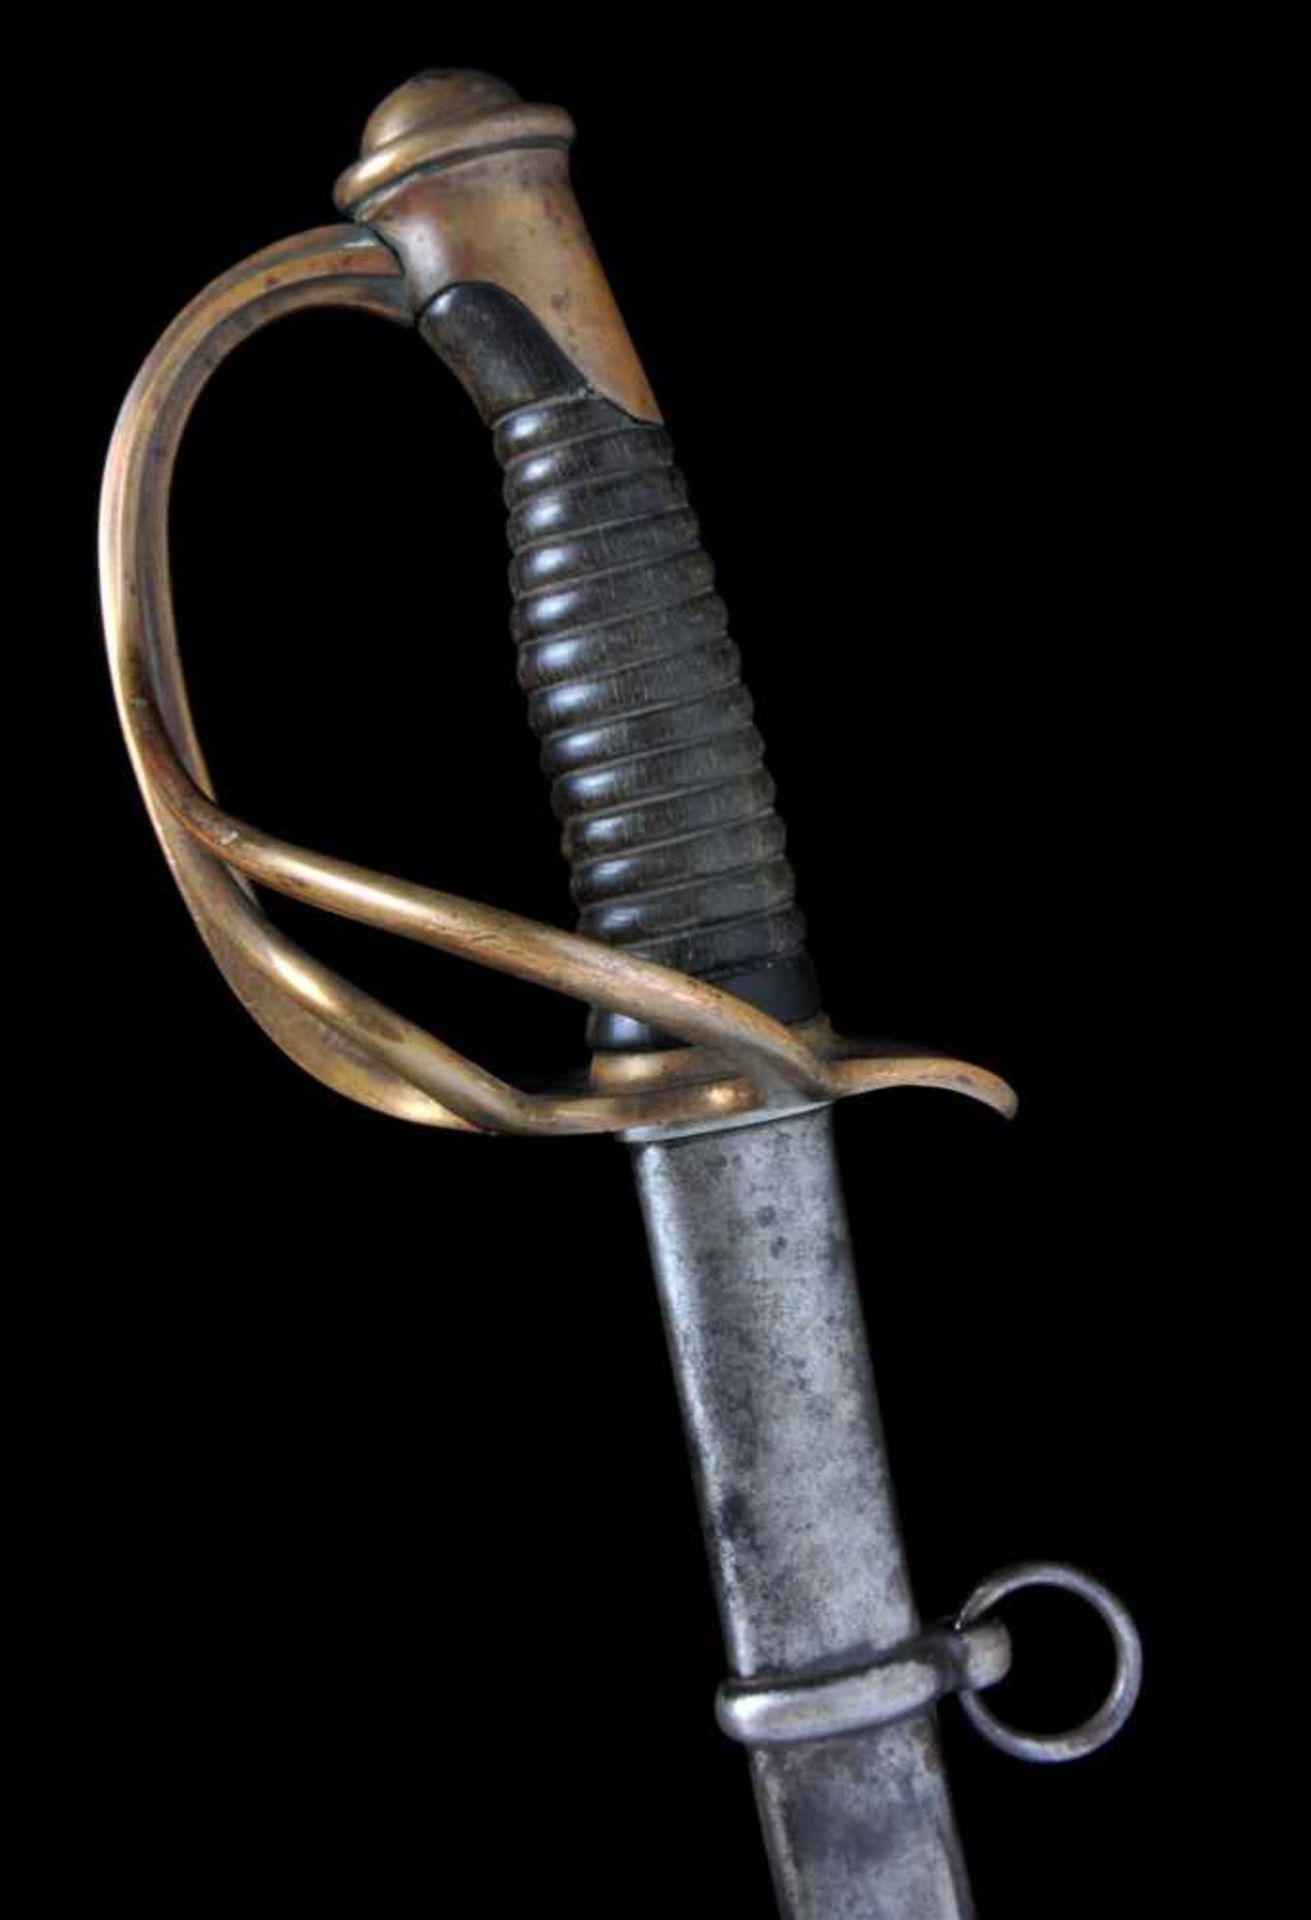 A FRENCH M1822 LIGHT CAVALRY TROOPER’S SABER, AFTER CHANGES IN 1860. FRANCE, NANTES. Sabre de troupe